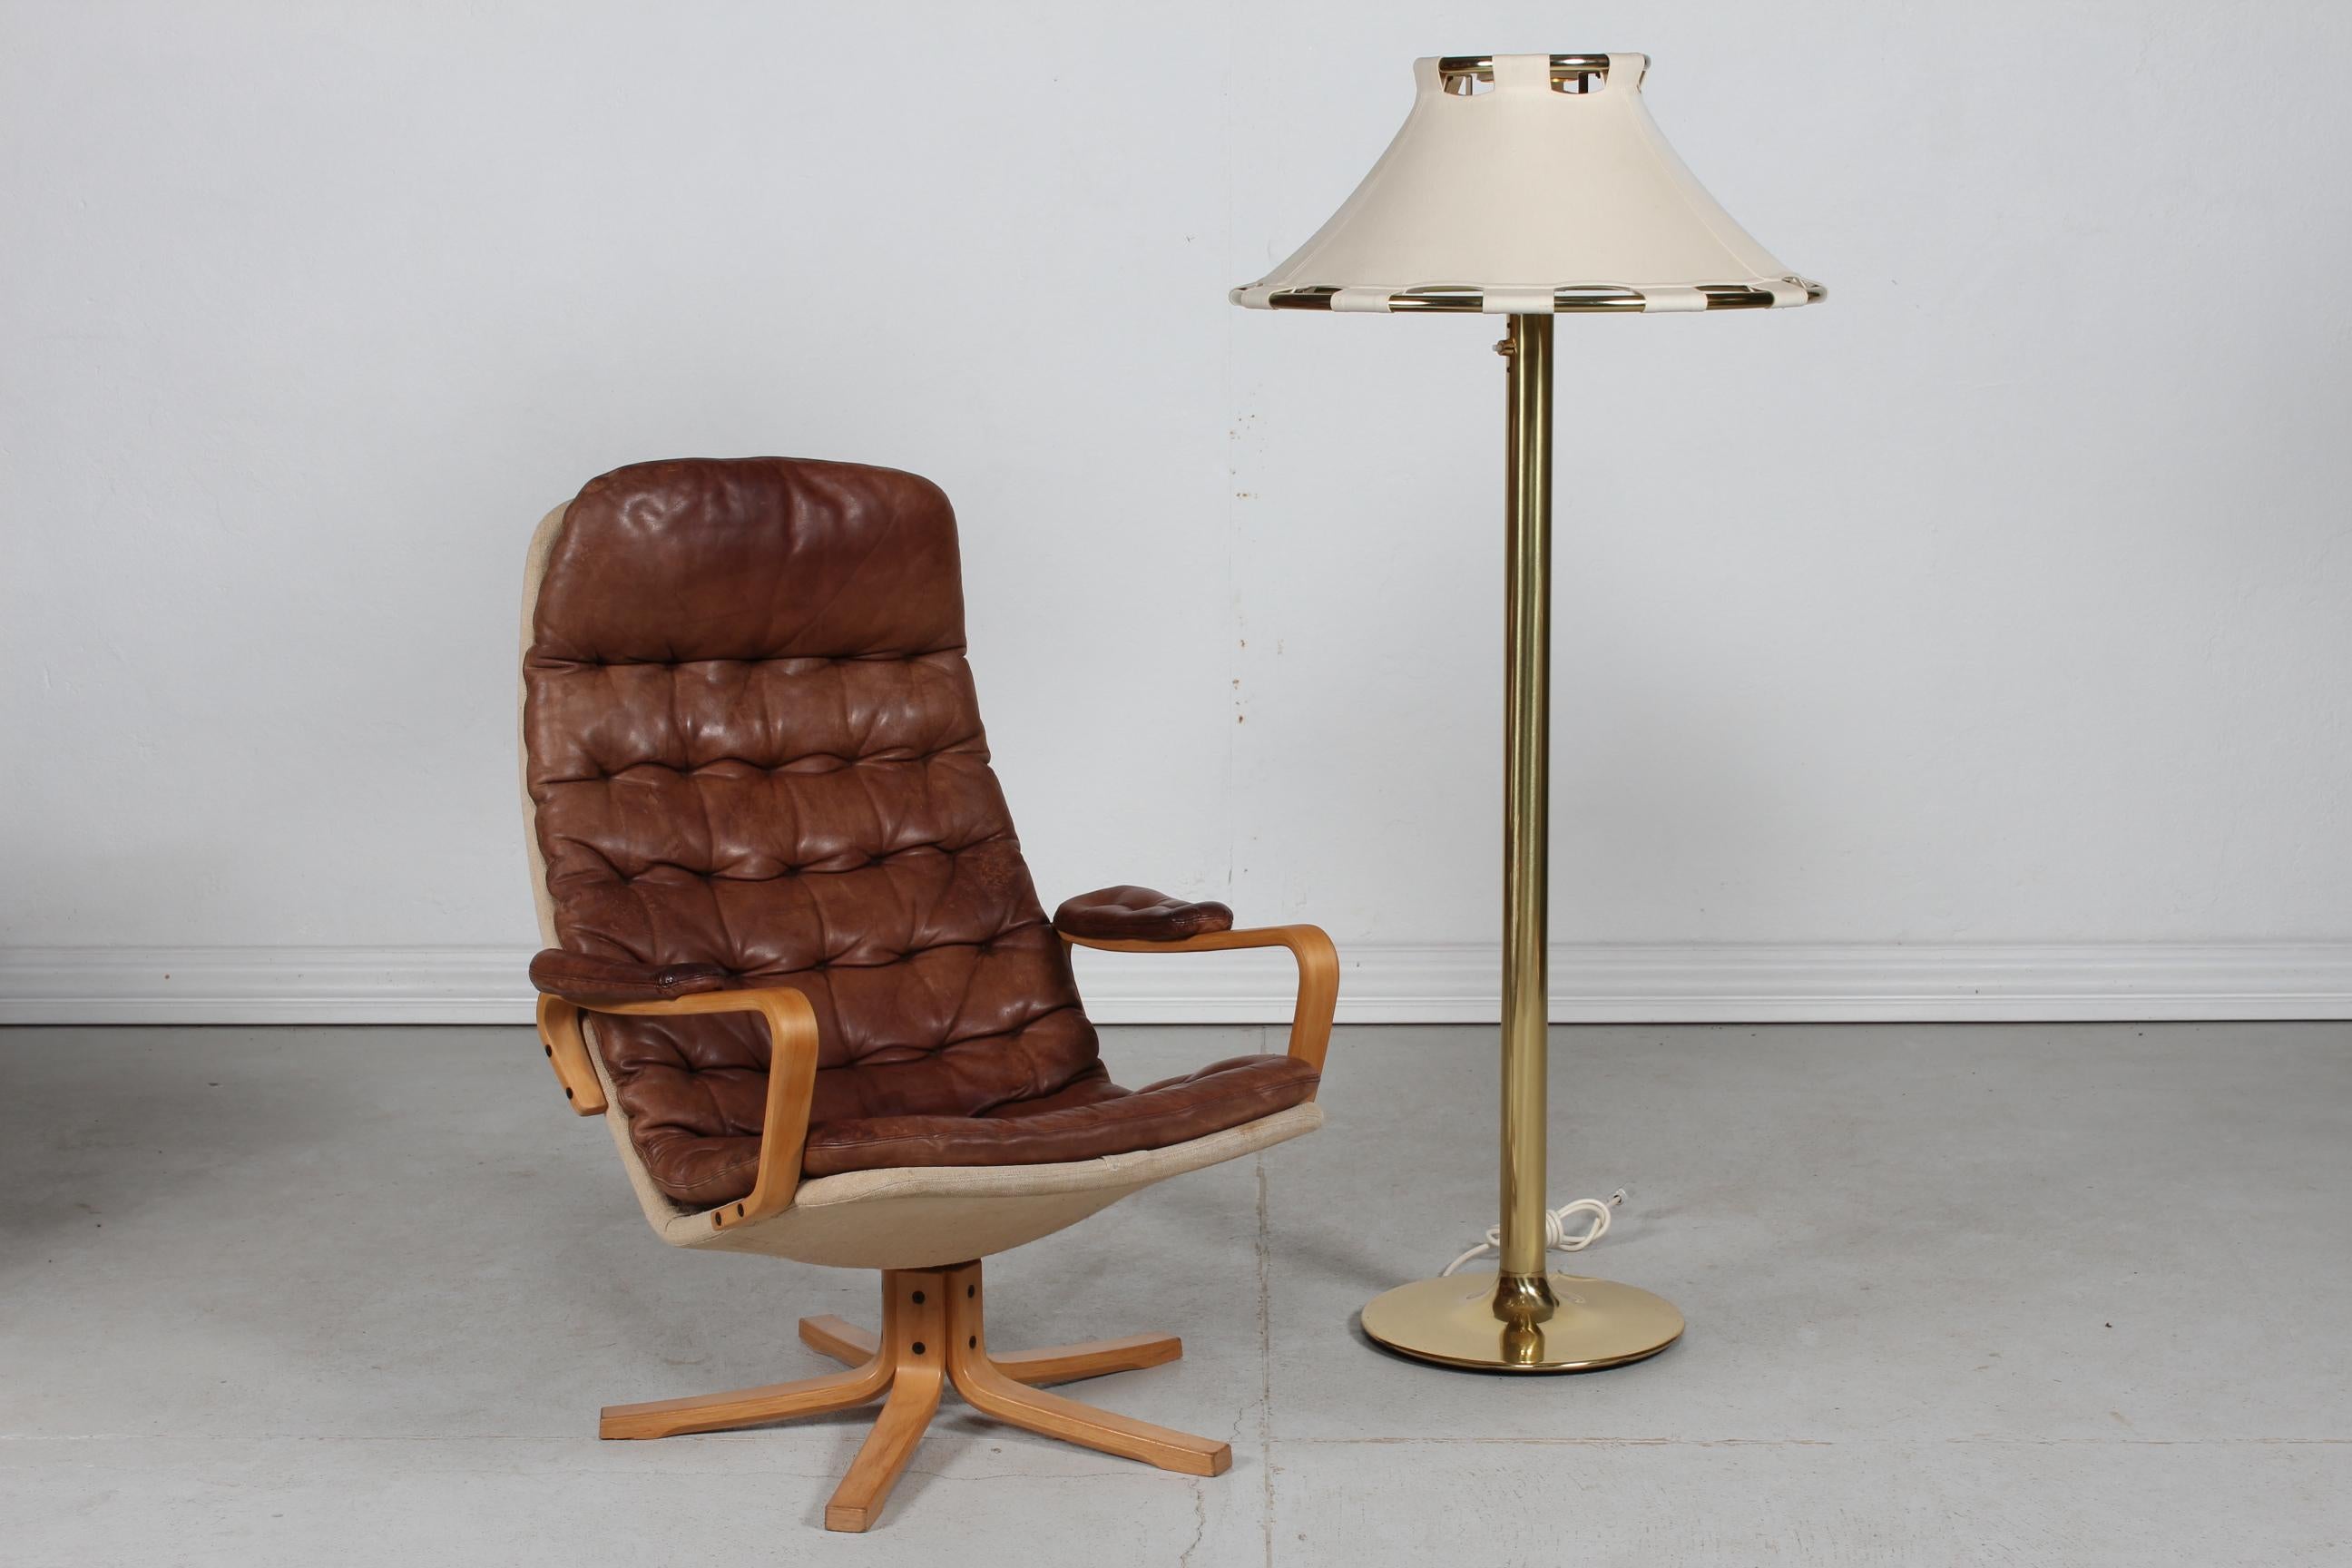 Swedish Sam Larsson Mona Roto Swivel Chair Beech and Cognac Colored Leather 1970 For Sale 8